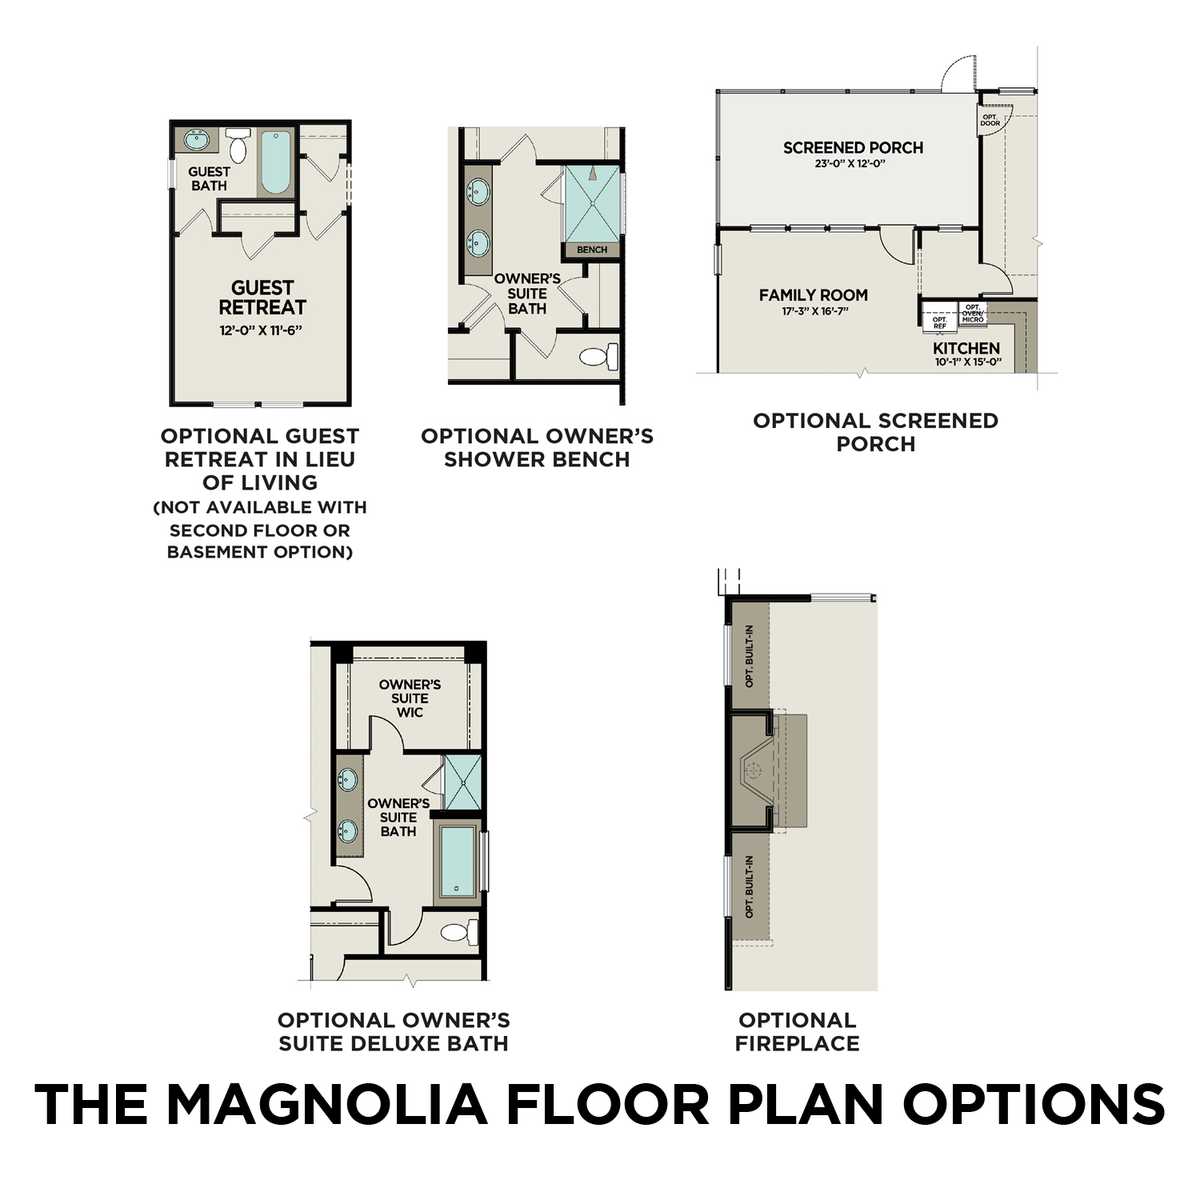 2 - The Magnolia C – Side Entry floor plan layout for 209 Evetor Road in Davidson Homes' Everleigh community.